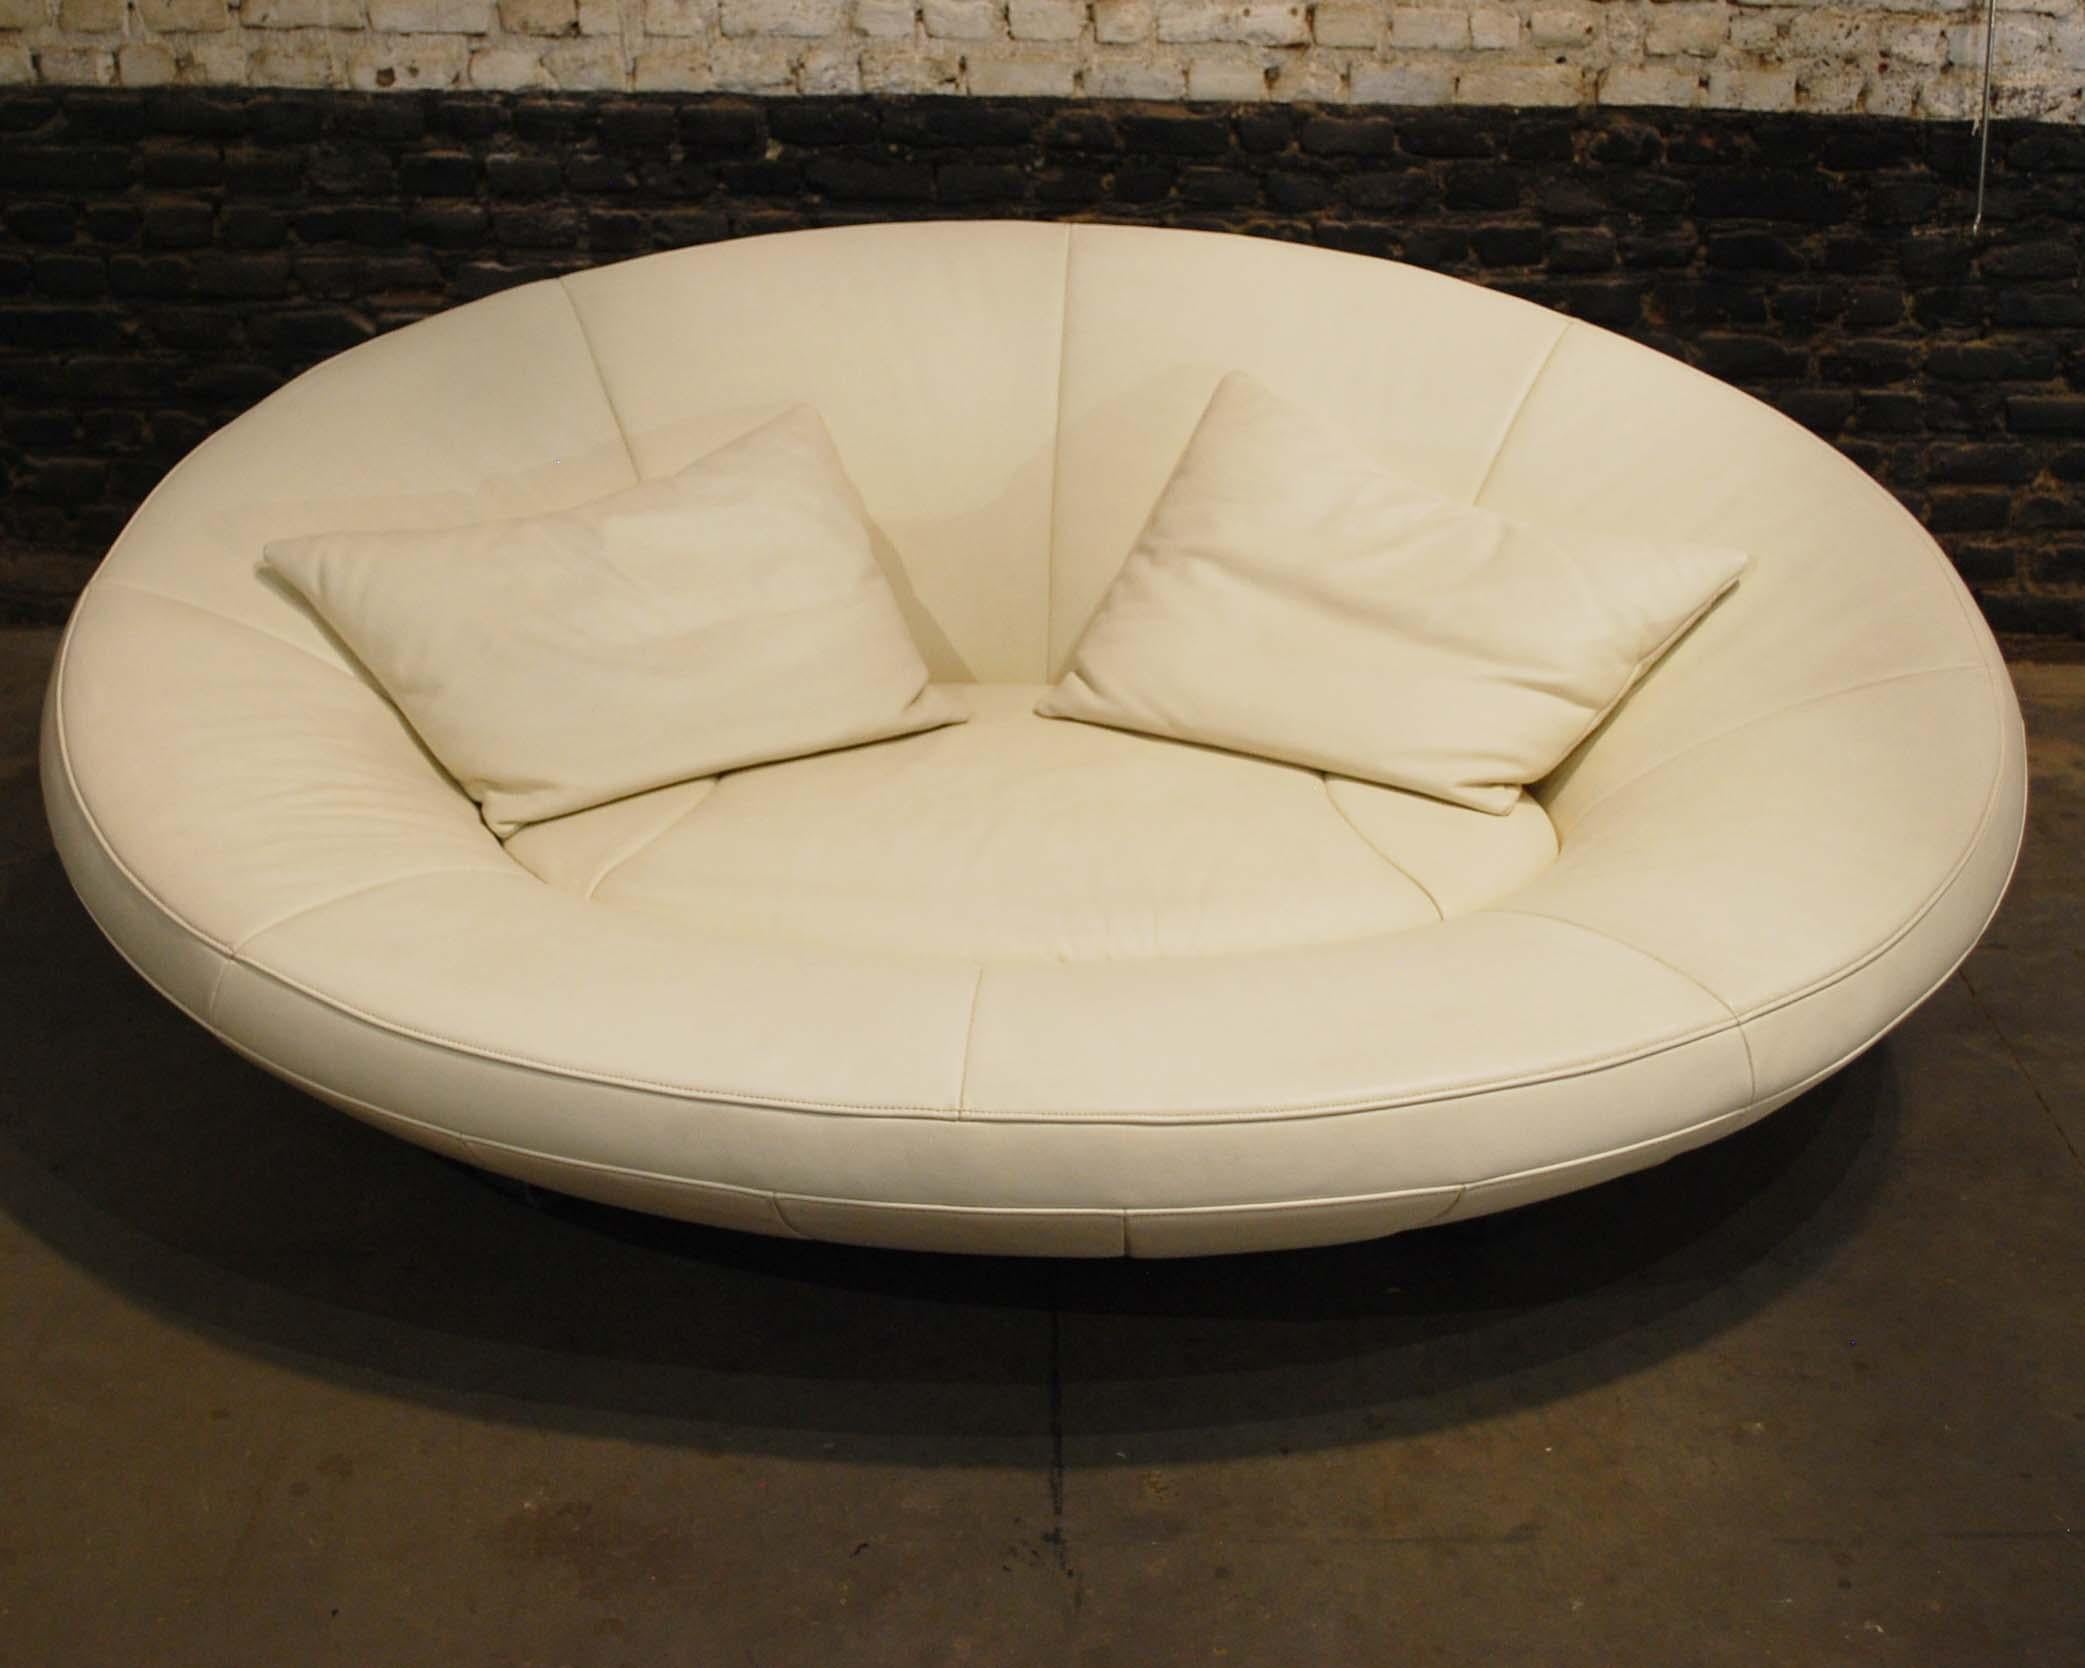 A rare Swiss lounge sofa model DS-152 designed by Jane Worthington for De Sede. It comes in the original white leather upholstery with a flattened chromed steel frame. The sofa is marked with a metal plaque. It also comes with the two original loose